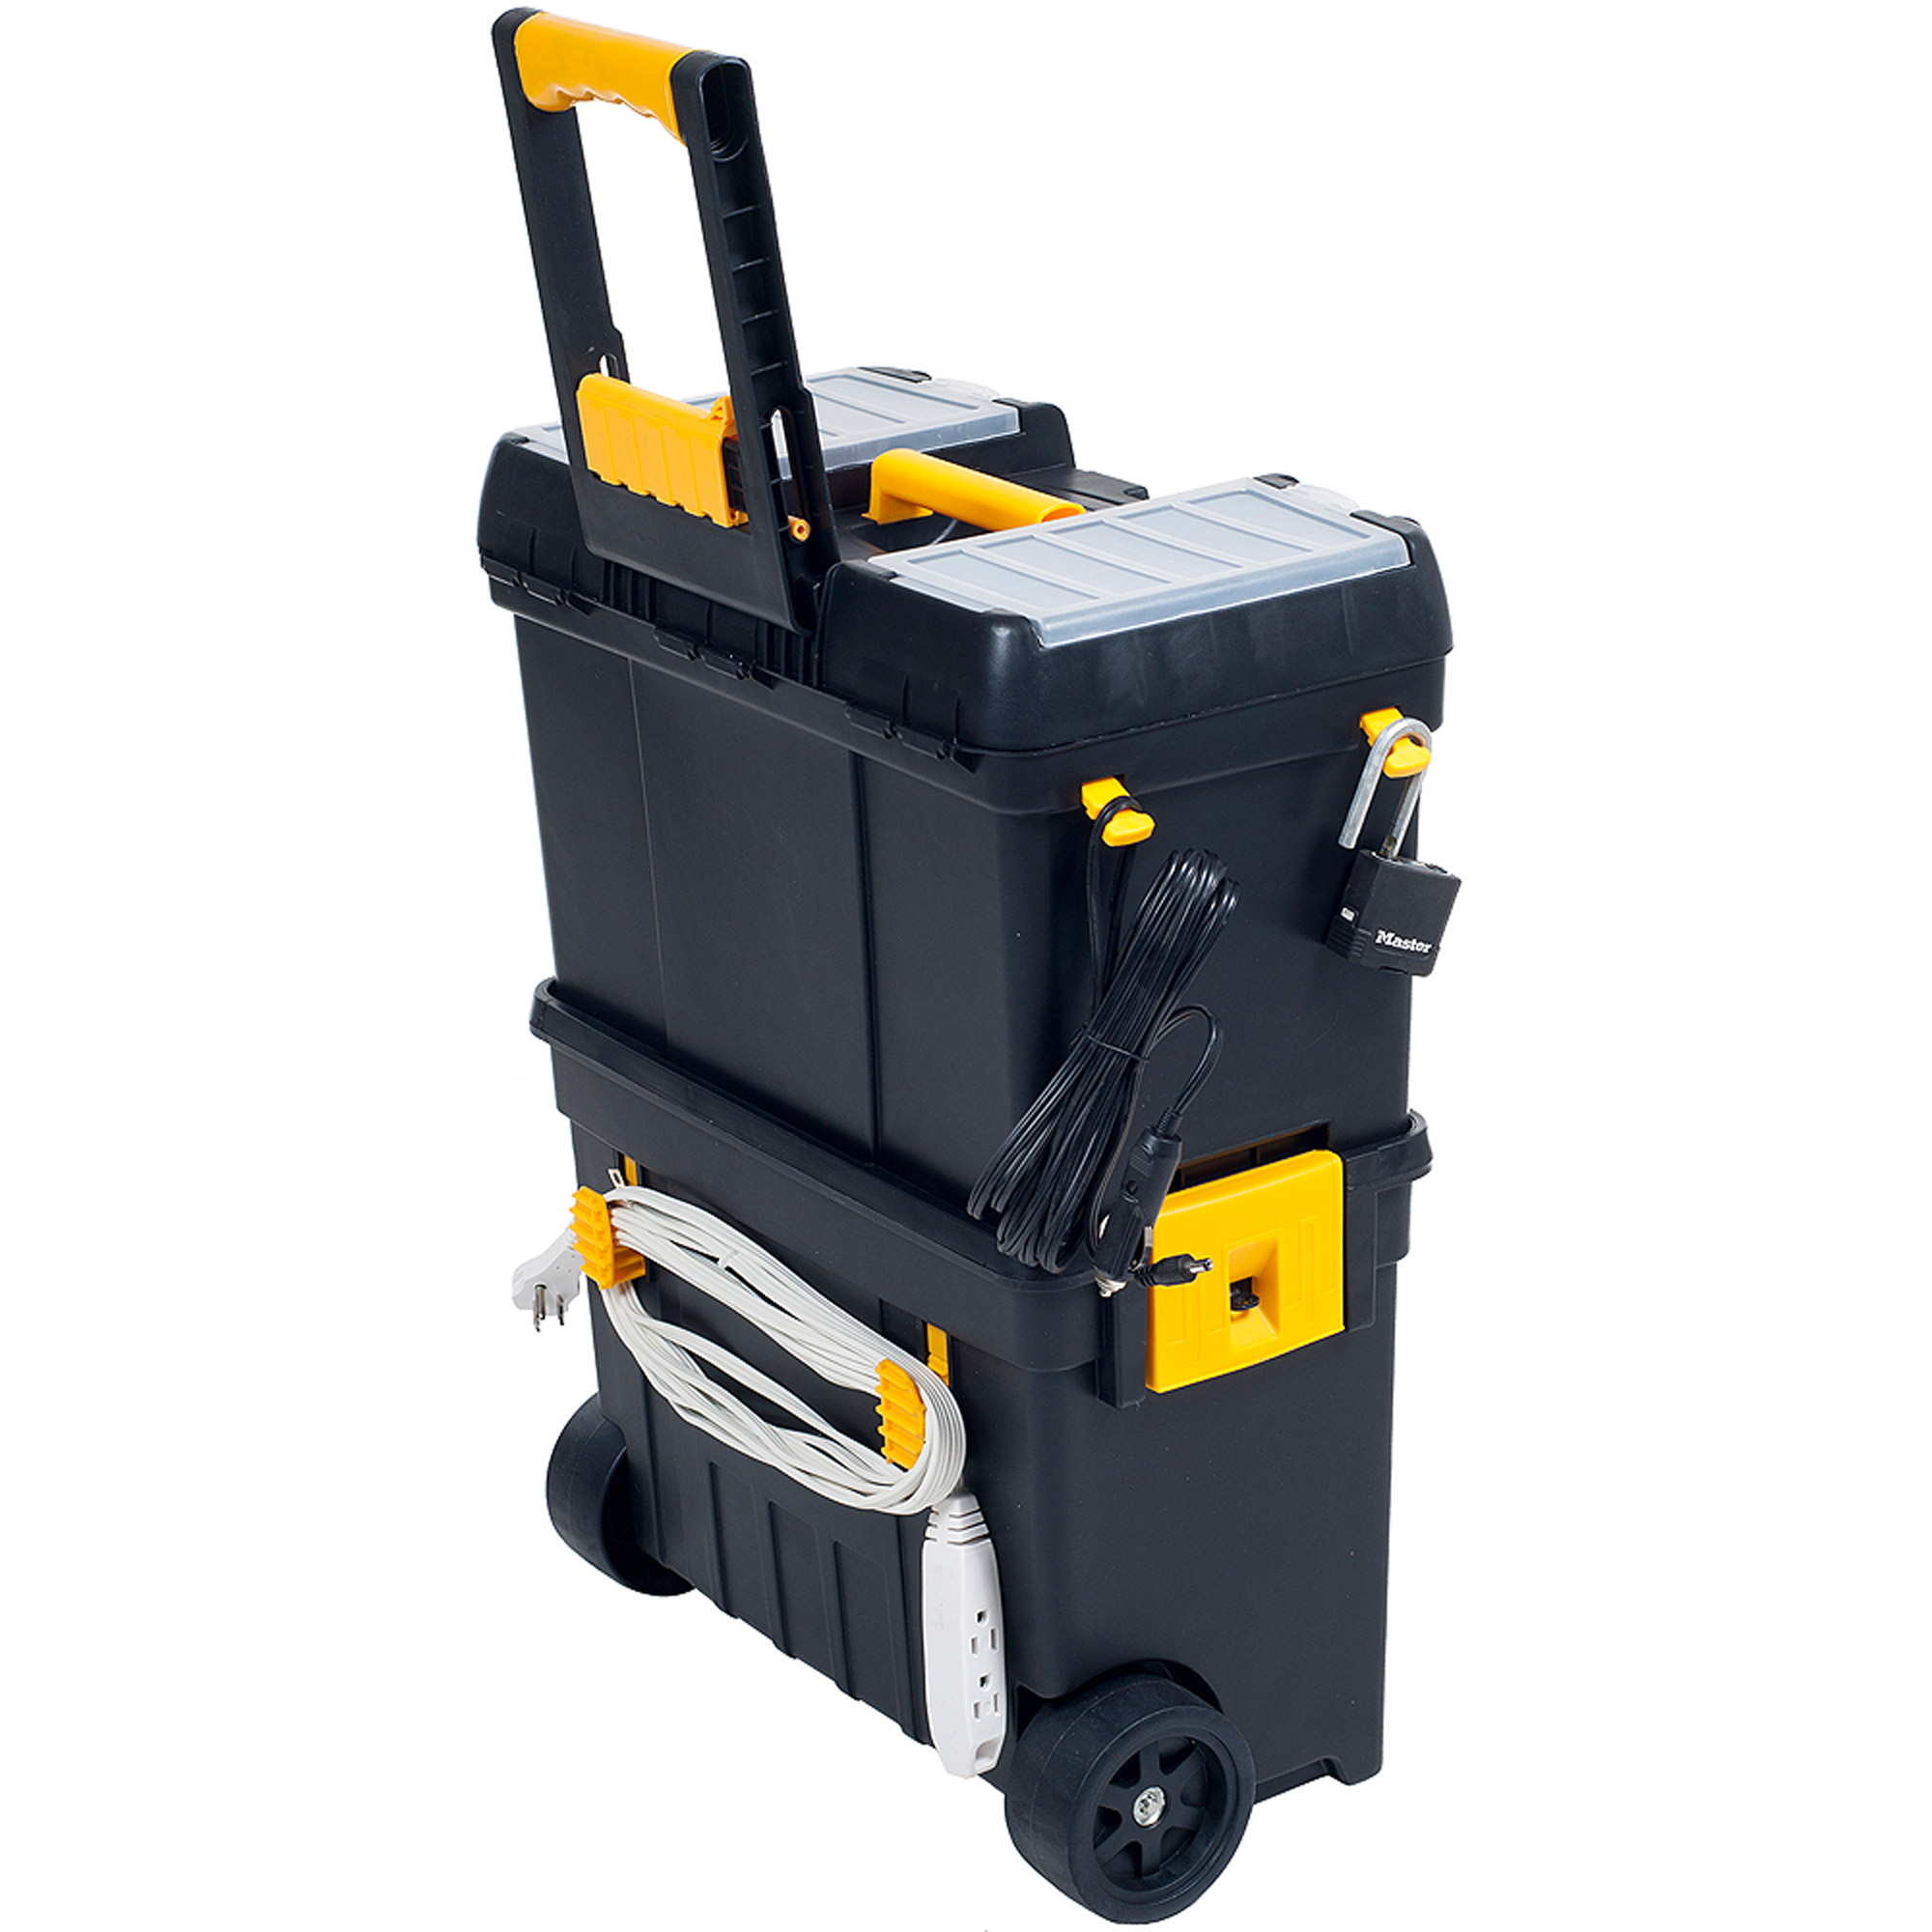 Stalwart Portable Toolbox with Wheels, Comfort Grip, and Drawers (Black) - image 4 of 6